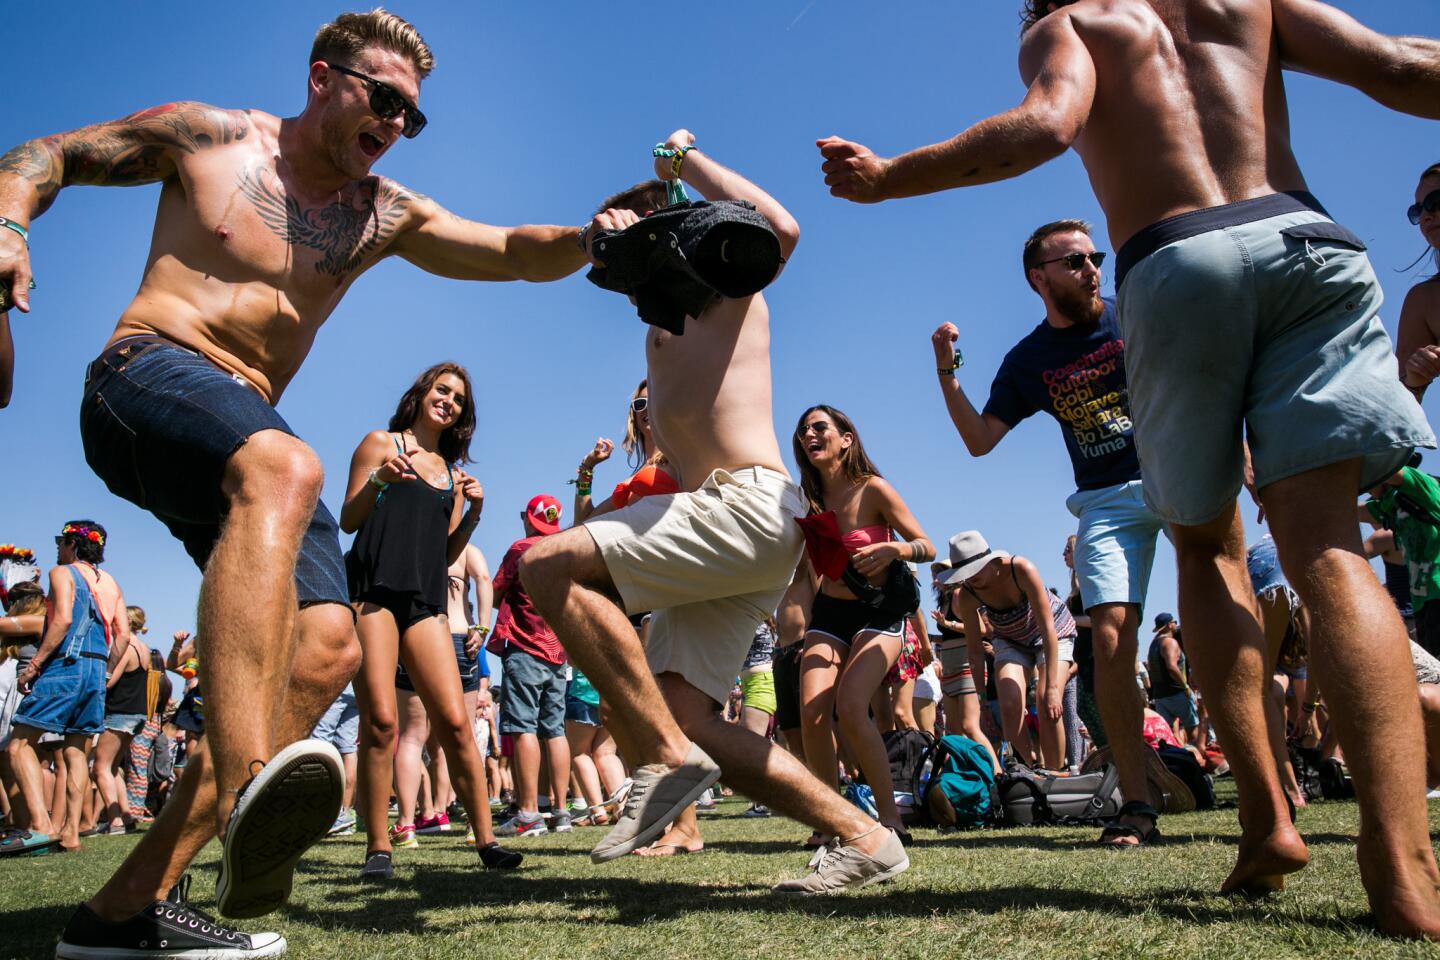 Dehydration, lack of sleep, excessive sun exposure, dangerously high decibel levels and poor eating can all lead to festival-goers feeling decidedly wrecked. Here are some easy ways to stay healthy at any big outdoor event.